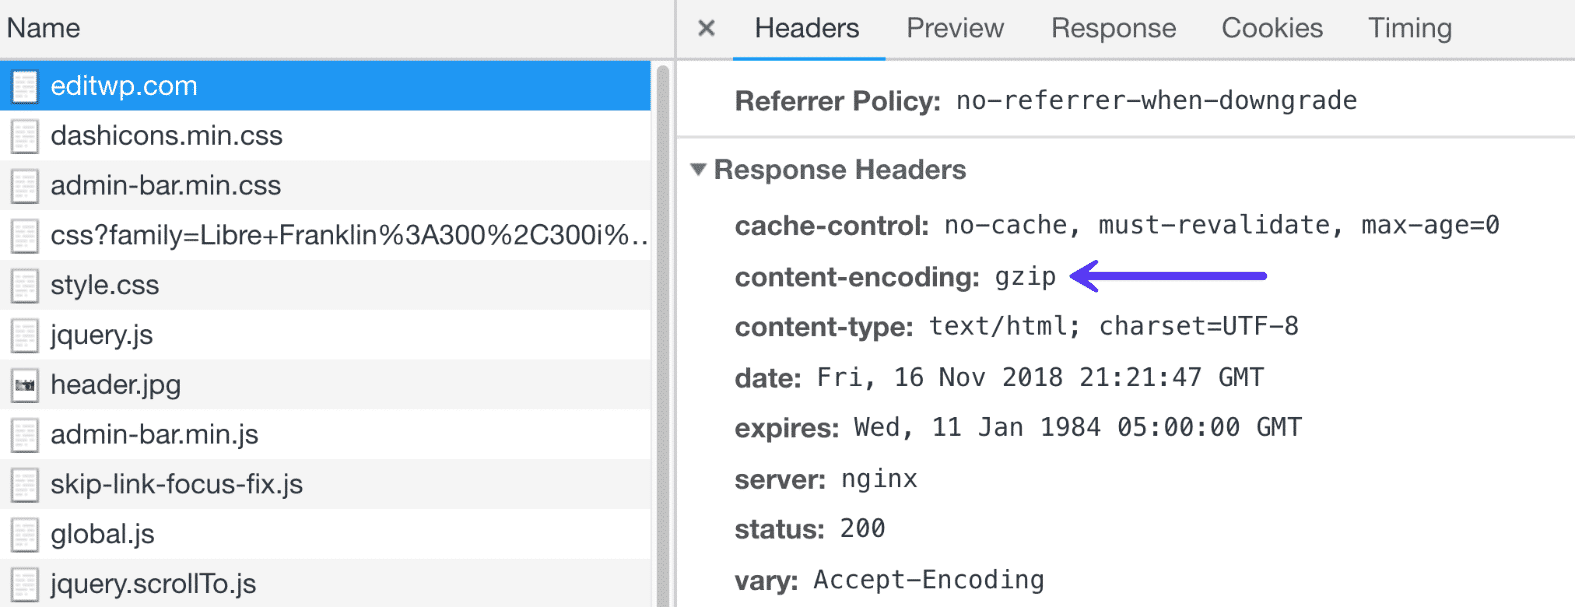 Content-encoding HTTP header for GZIP